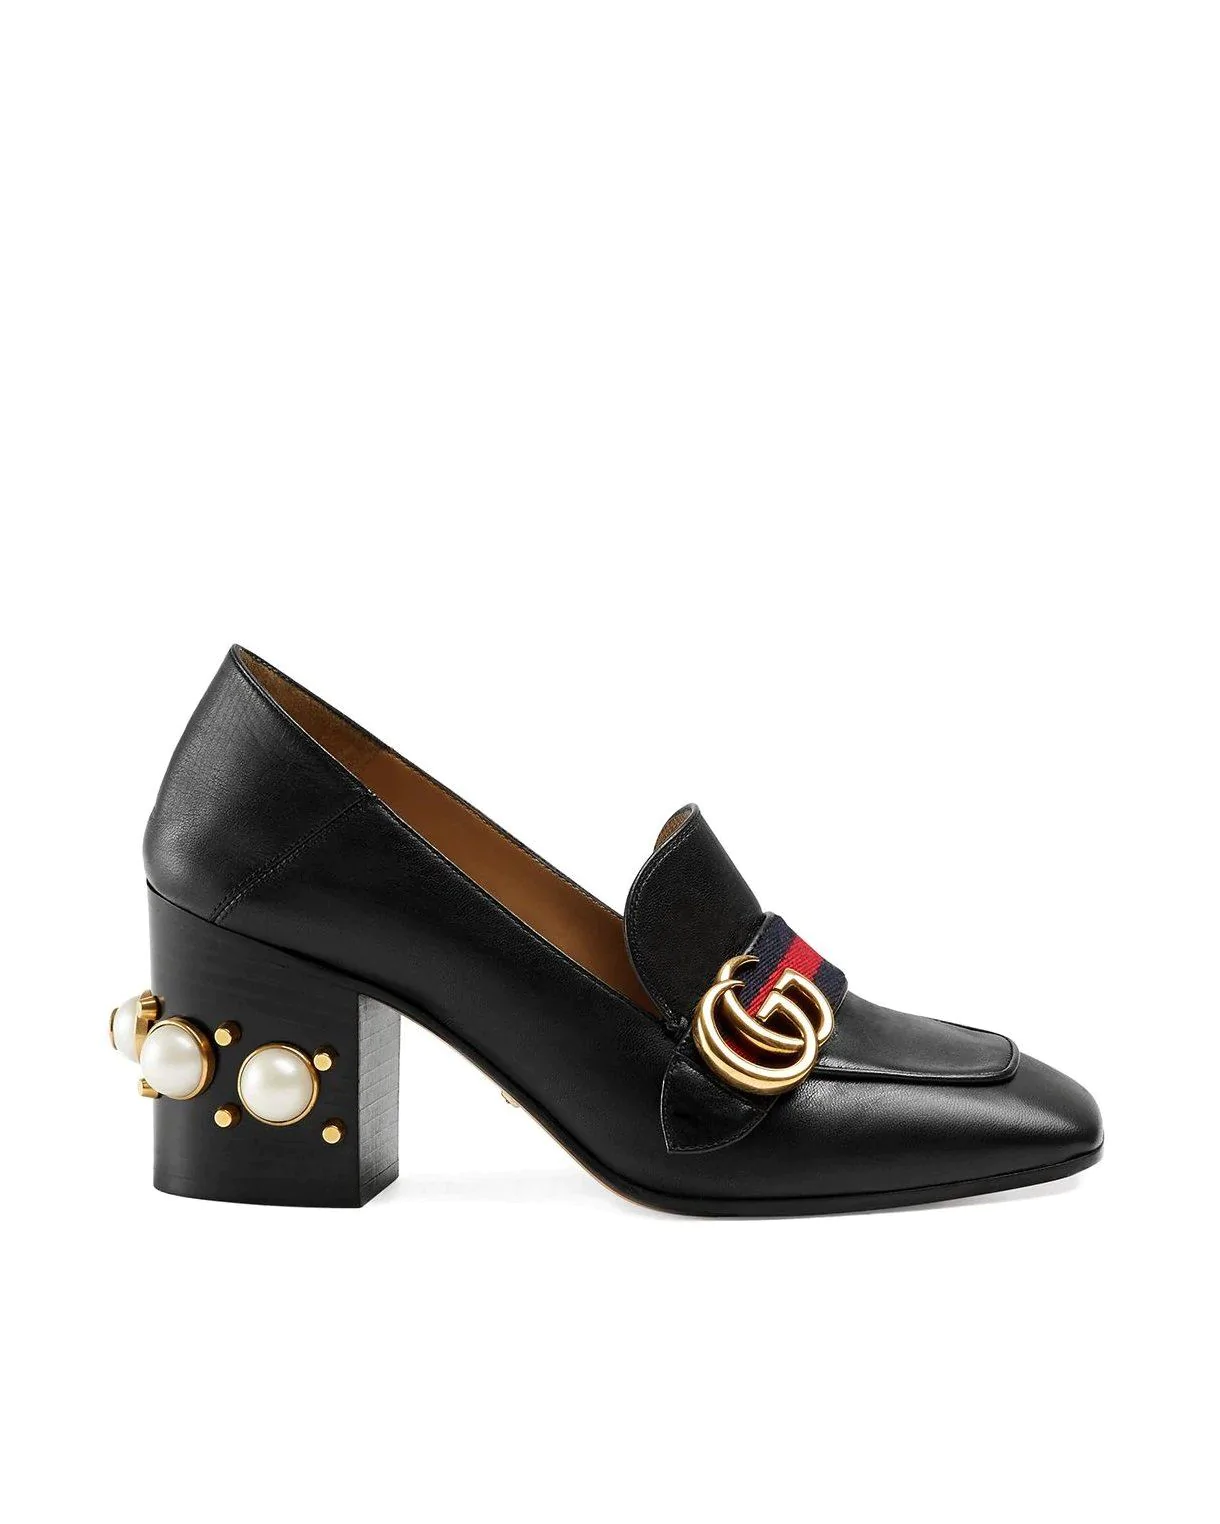 Gucci 80mm Pearl Heel Leather Pumps